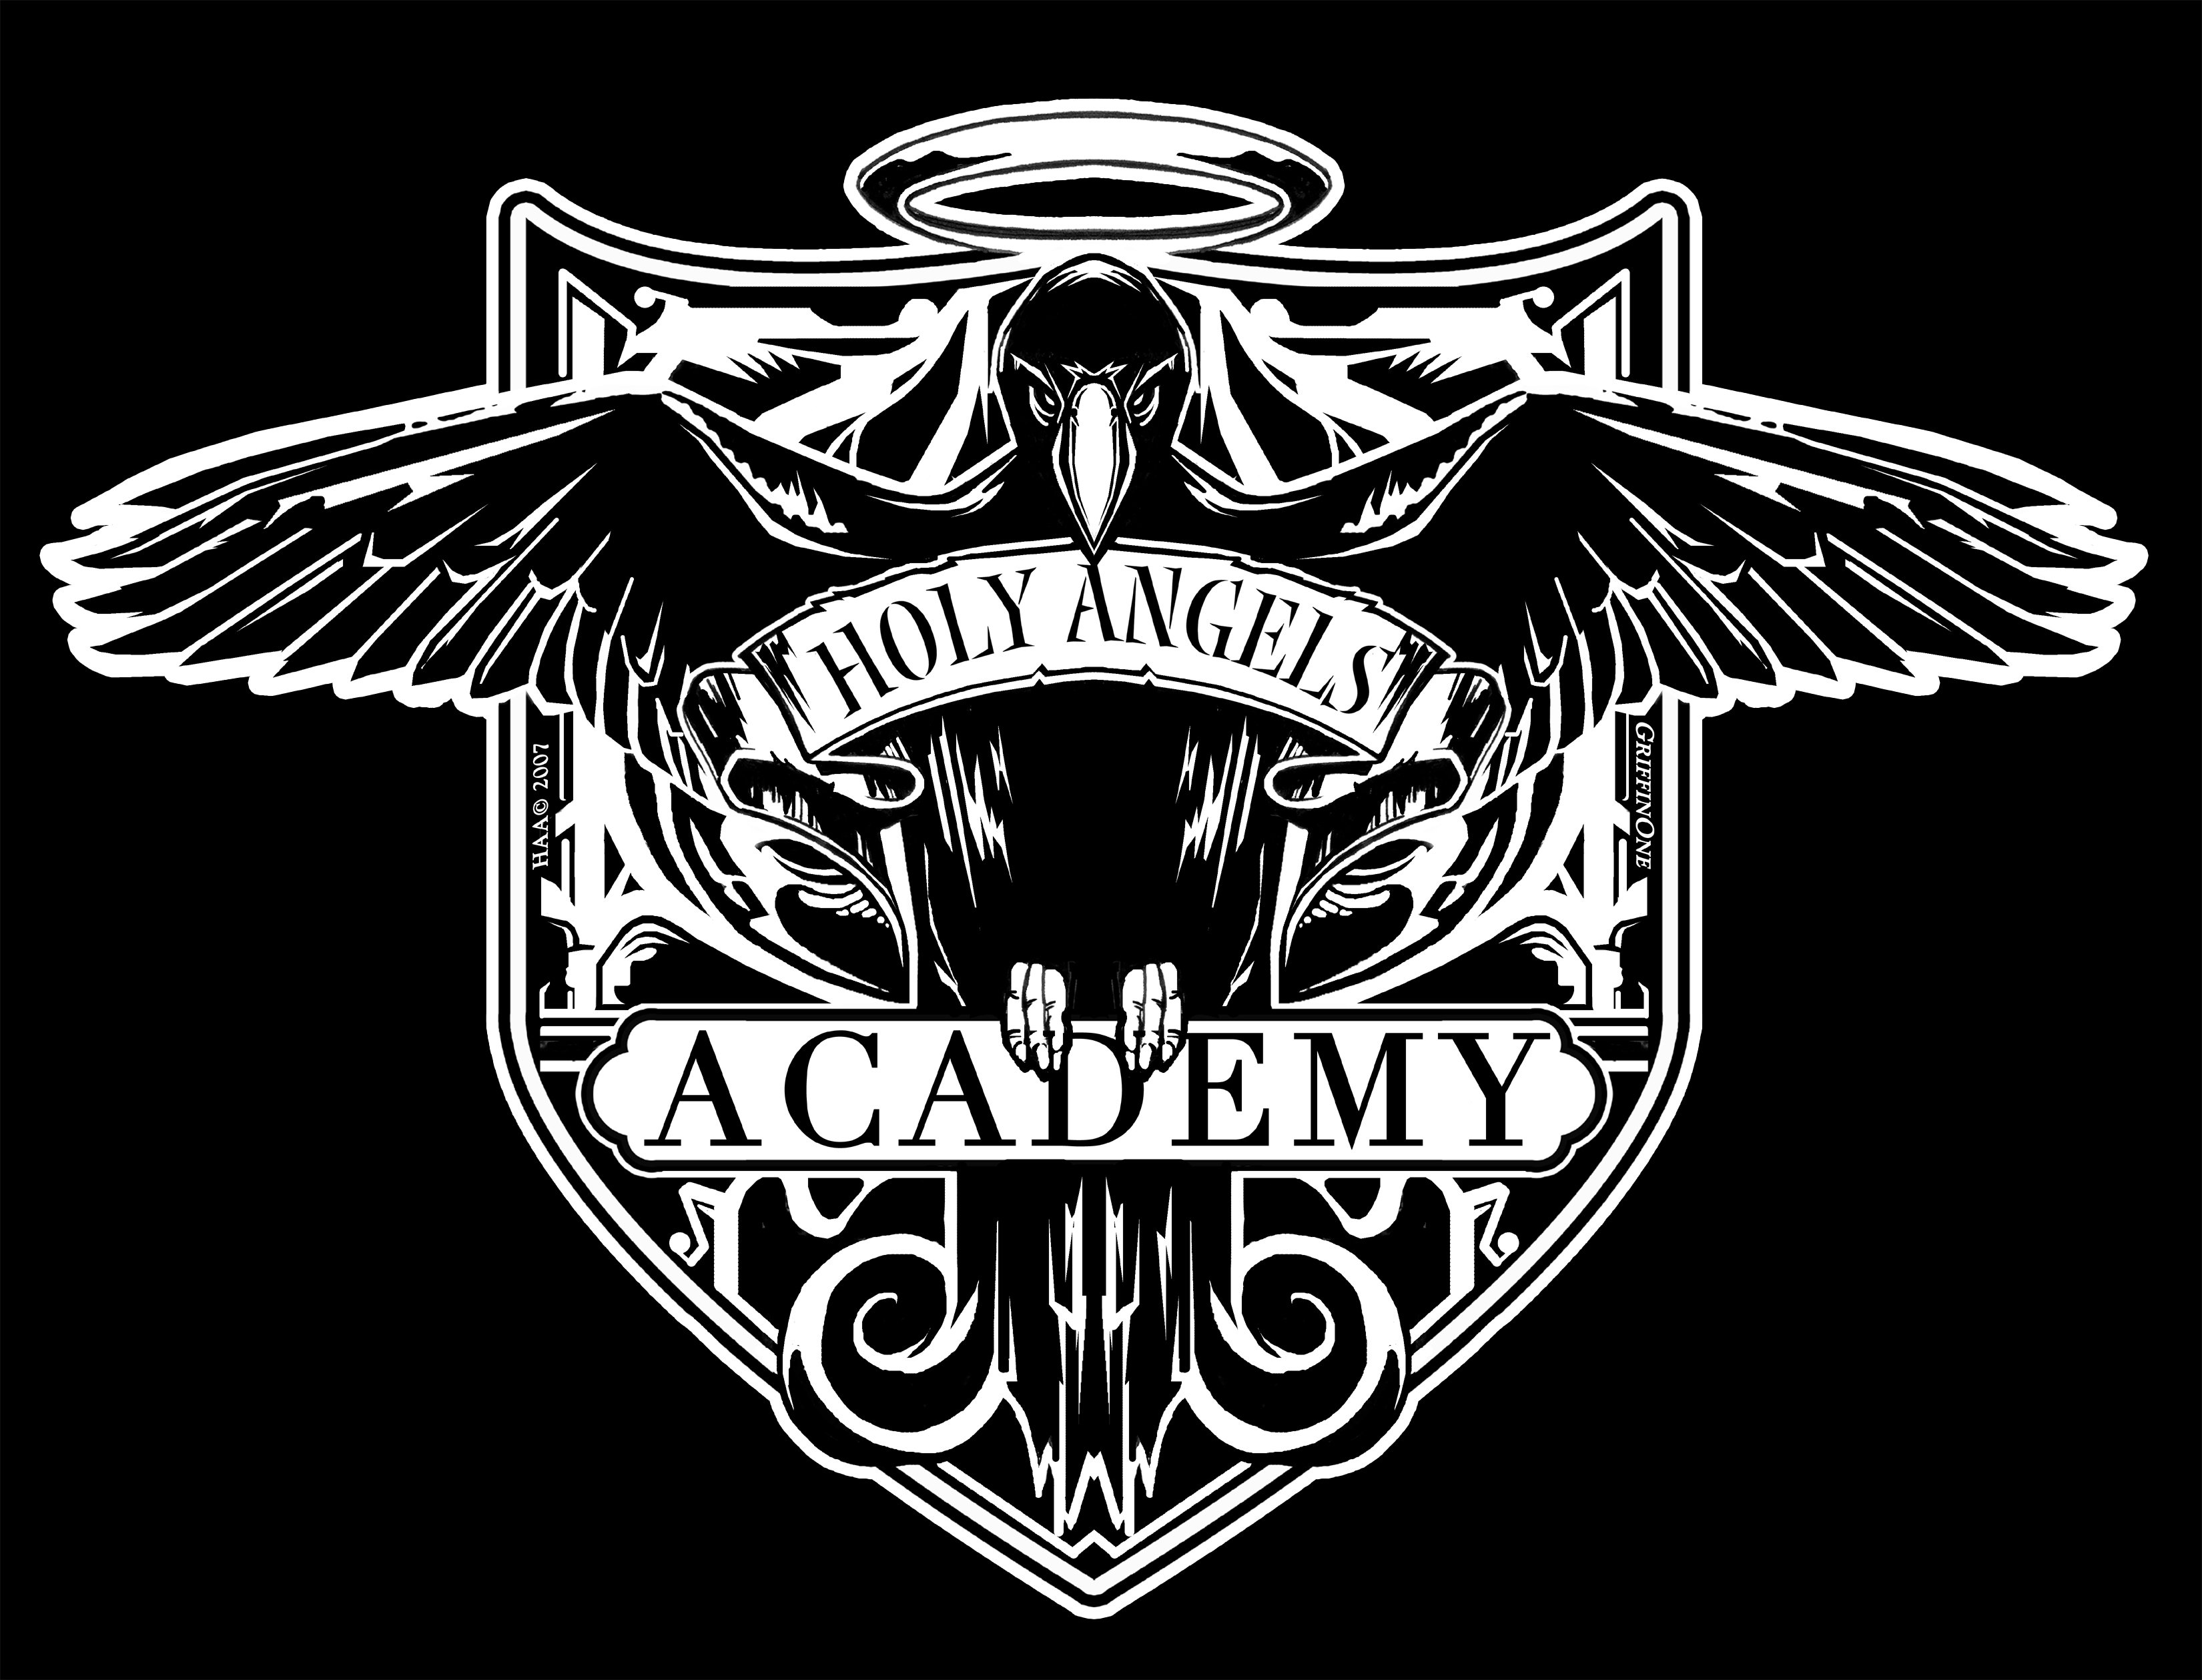  HOLY ANGELS ACADEMY